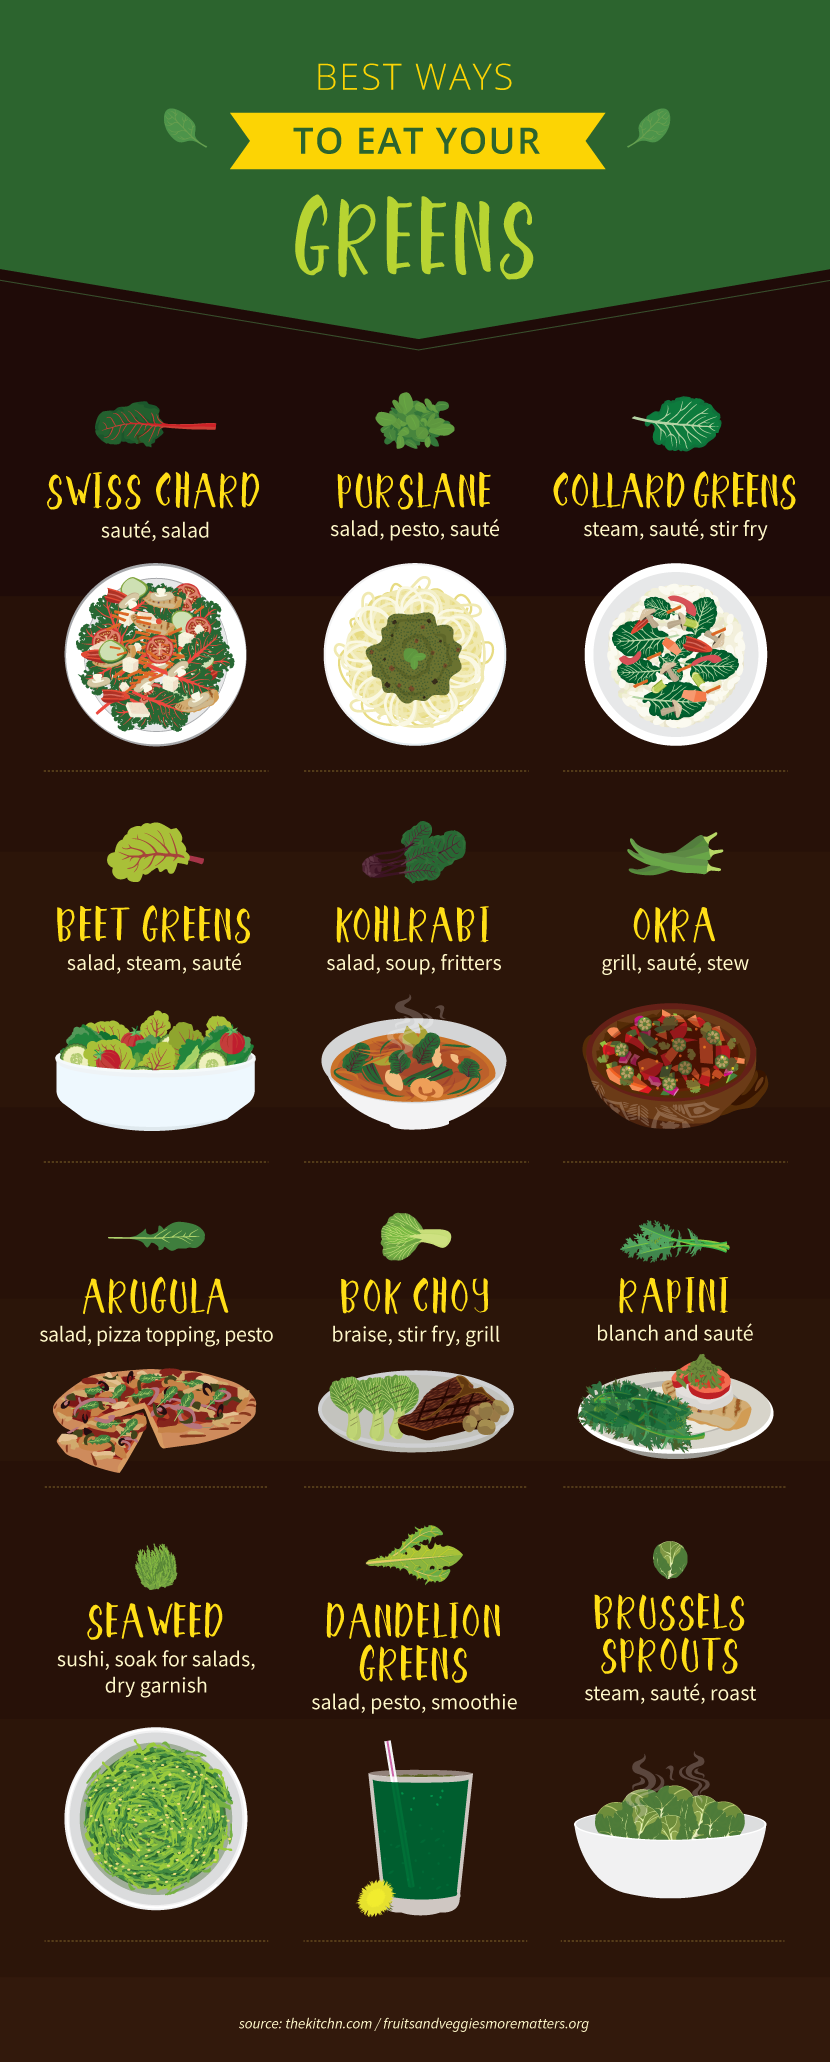 Best Way to Eat Your Greens - Try These Superfood Greens